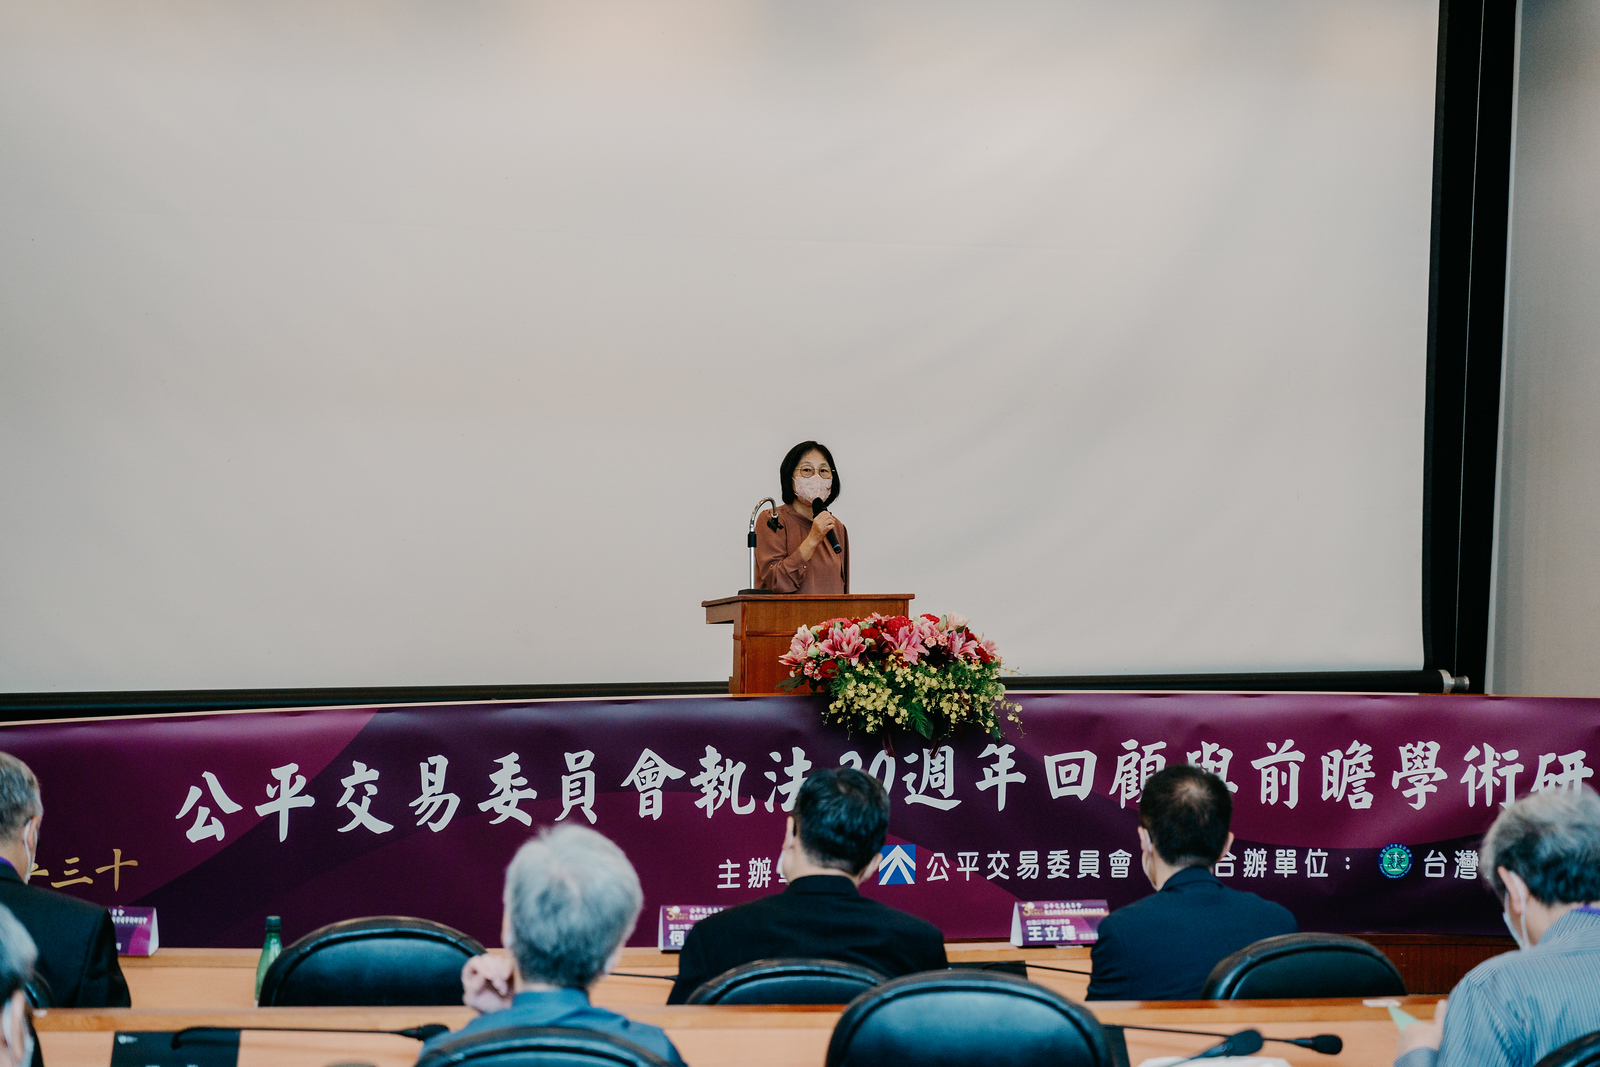 The FTC chairperson Ms. Lee May giving an opening remark at  the “Seminar on Retrospect and Prospect after 30 Years of Law Enforcement” on September 2, 2022.